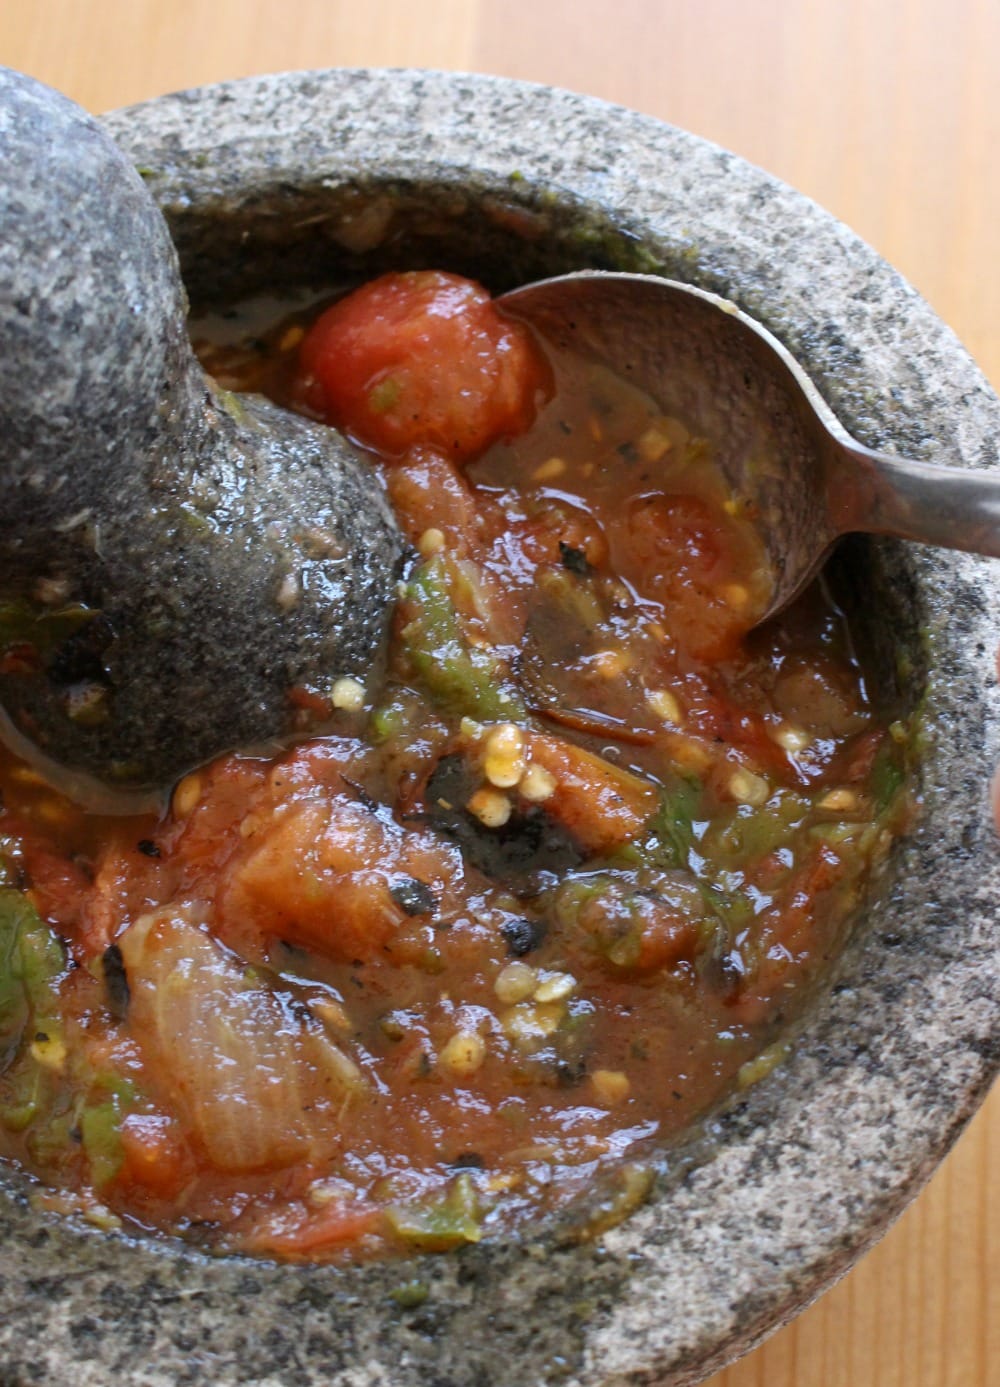 A spoon in a molcajete mixing the tomato salsa.